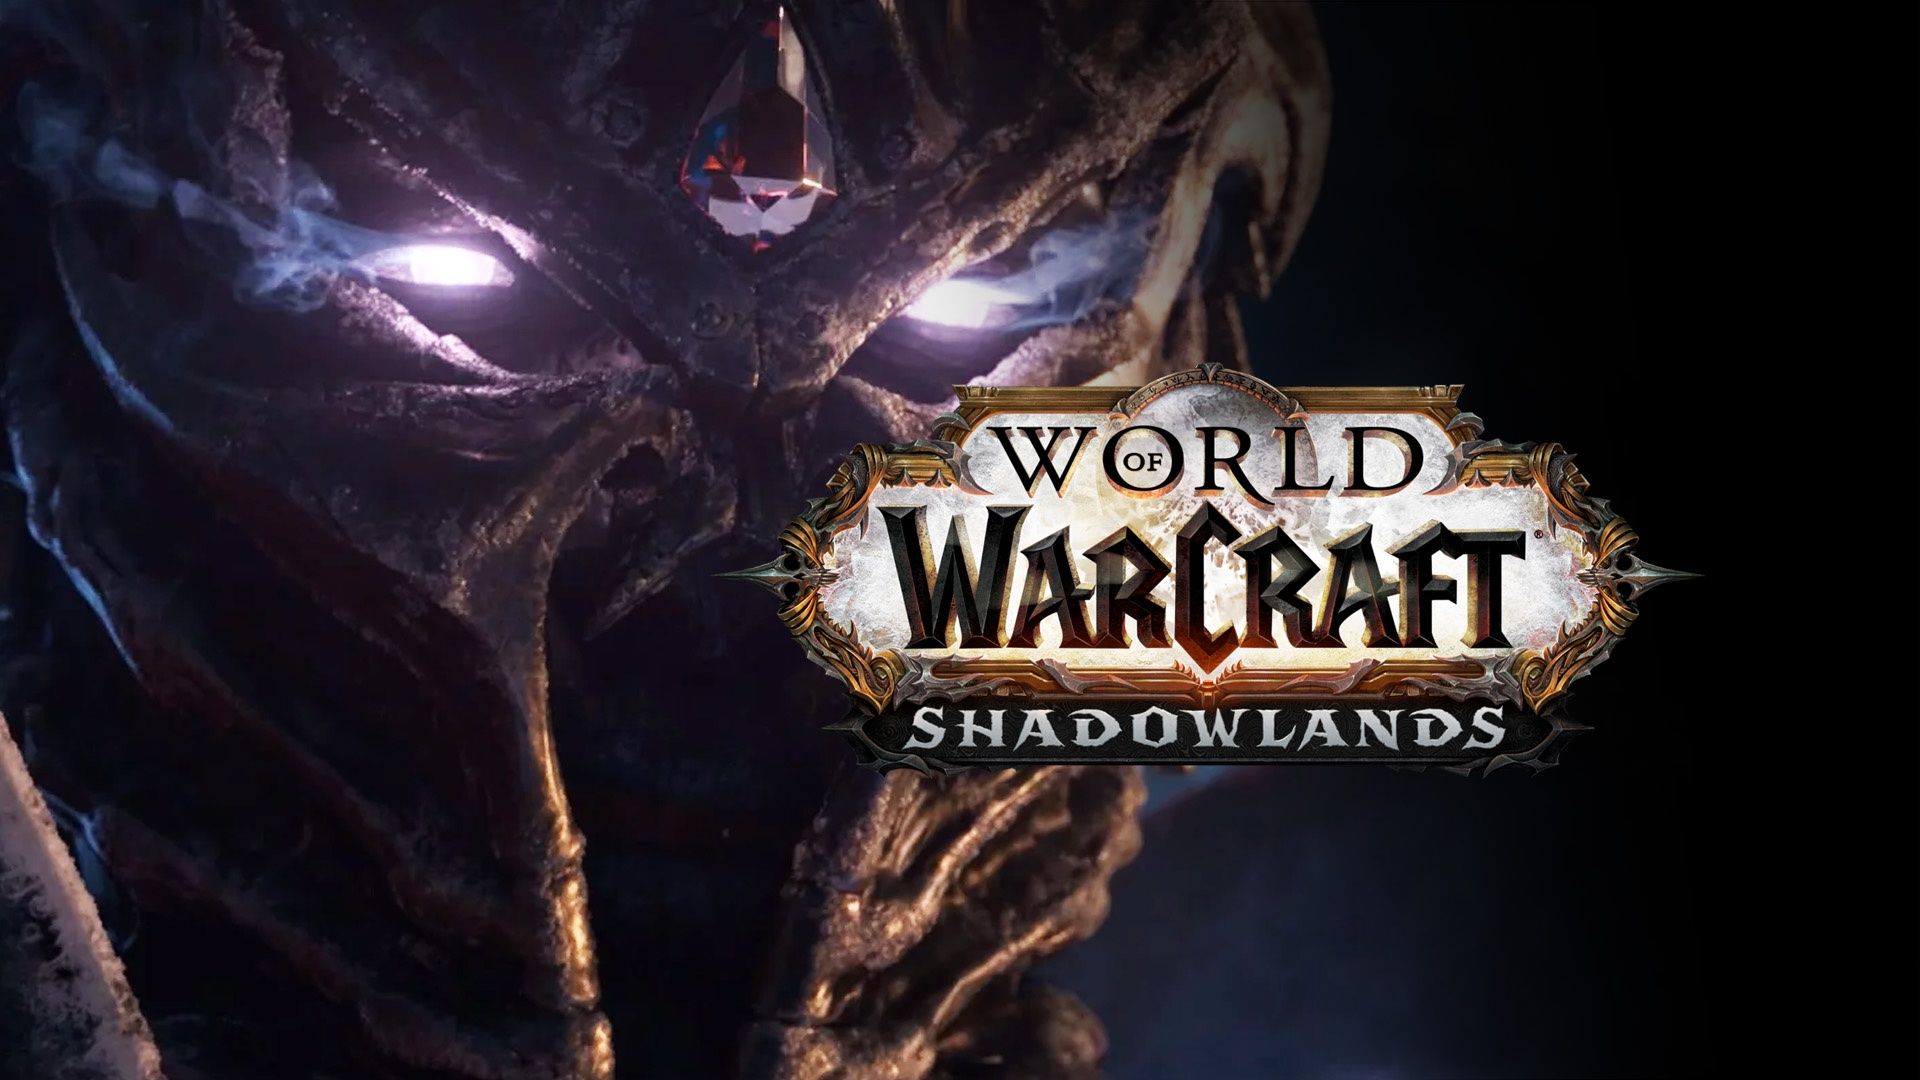 WoW Shadowlands Assets Now Being Used for Installation in Beta Battle.net Client, Hinting at a Looming Alpha Release